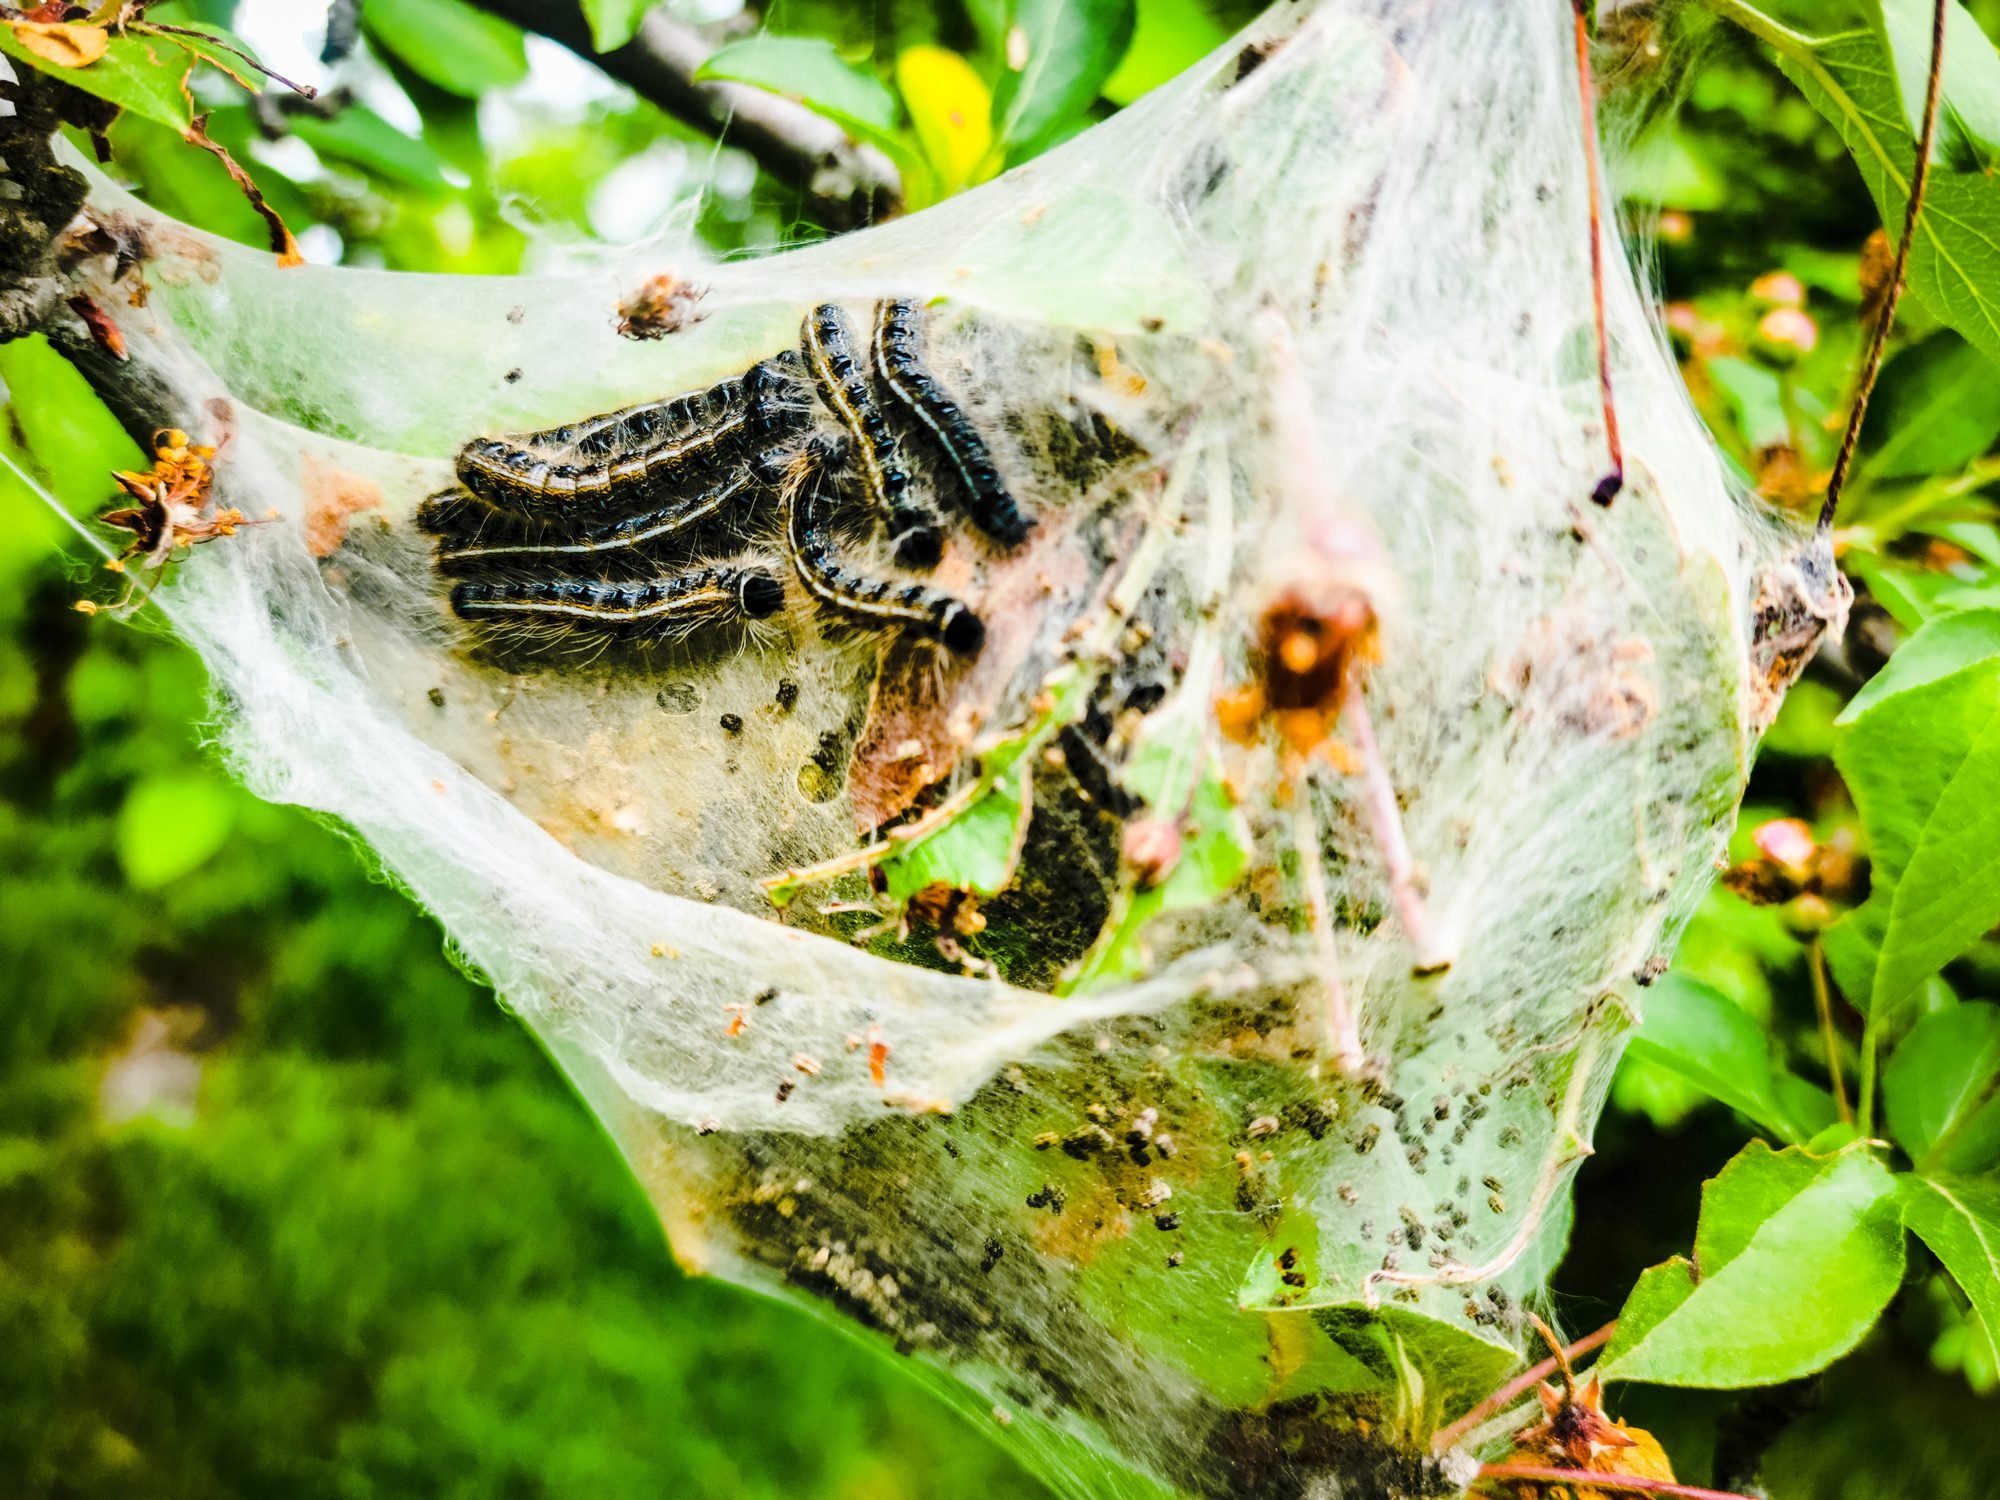 Controlling Caterpillars: Garden Insect Pests